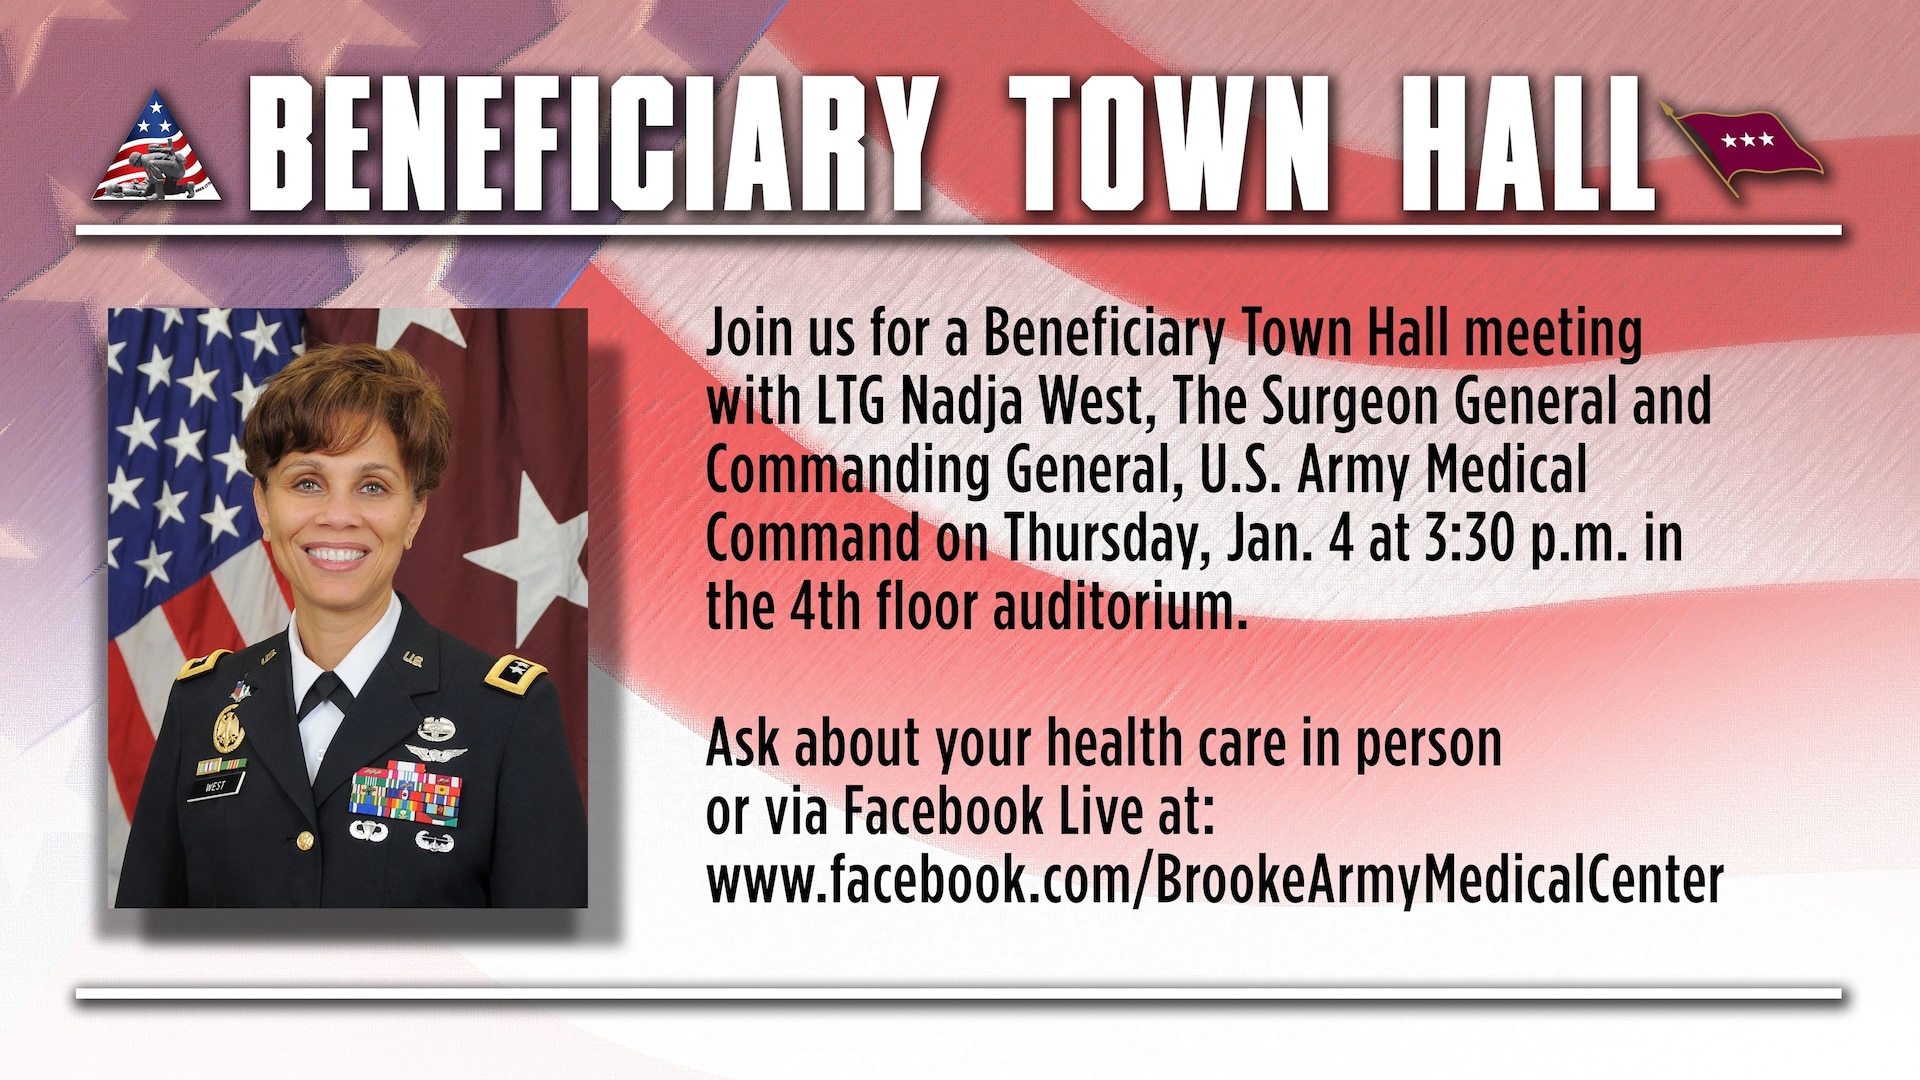 Lt. Gen. Nadja West, Army Surgeon General, holds a beneficiary town hall at 3:30 p.m. Jan. 4 at the fourth-floor auditorium at Brooke Army Medical Center at Joint Base San Antonio-Fort Sam Houston.